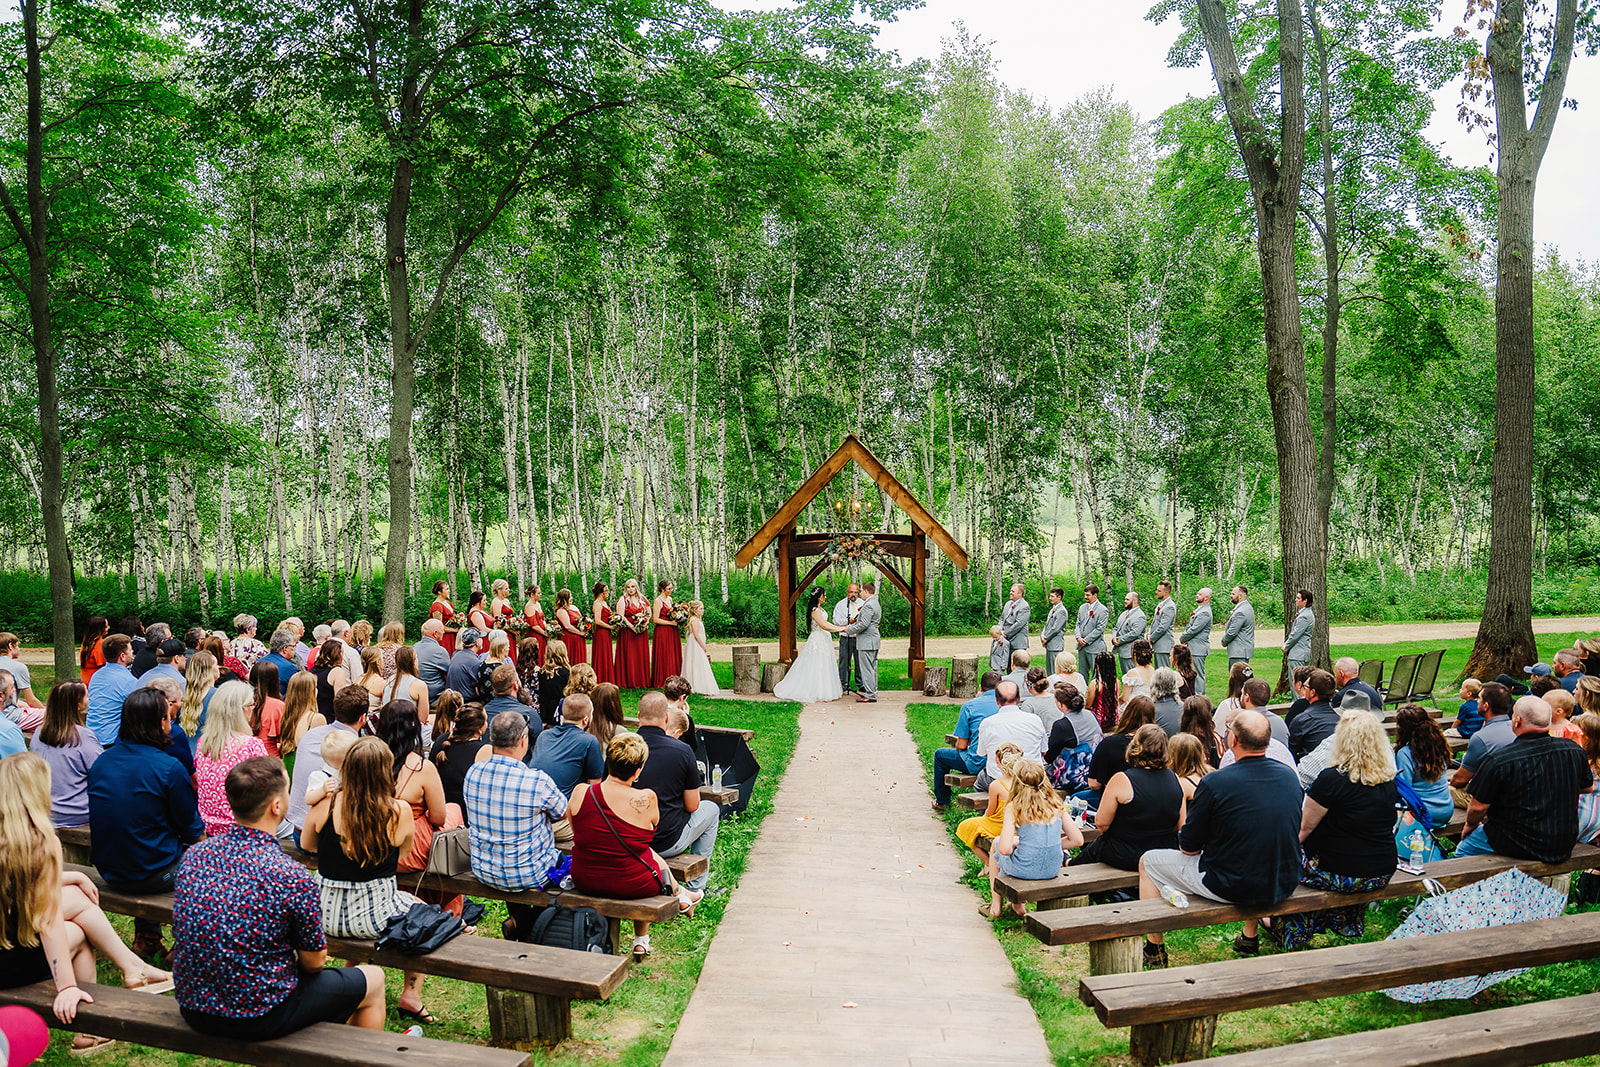 A gorgeous wedding ceremony takes place under a rustic arch at Dixon Apple Orchards. Outdoor wedding seating Rustic wedding ceremony Wisconsin wedding venue #dixonappleorchard #orchardweddingvenue #outdoorwedding #appleorchardwedding #wisconsinweddingvenue